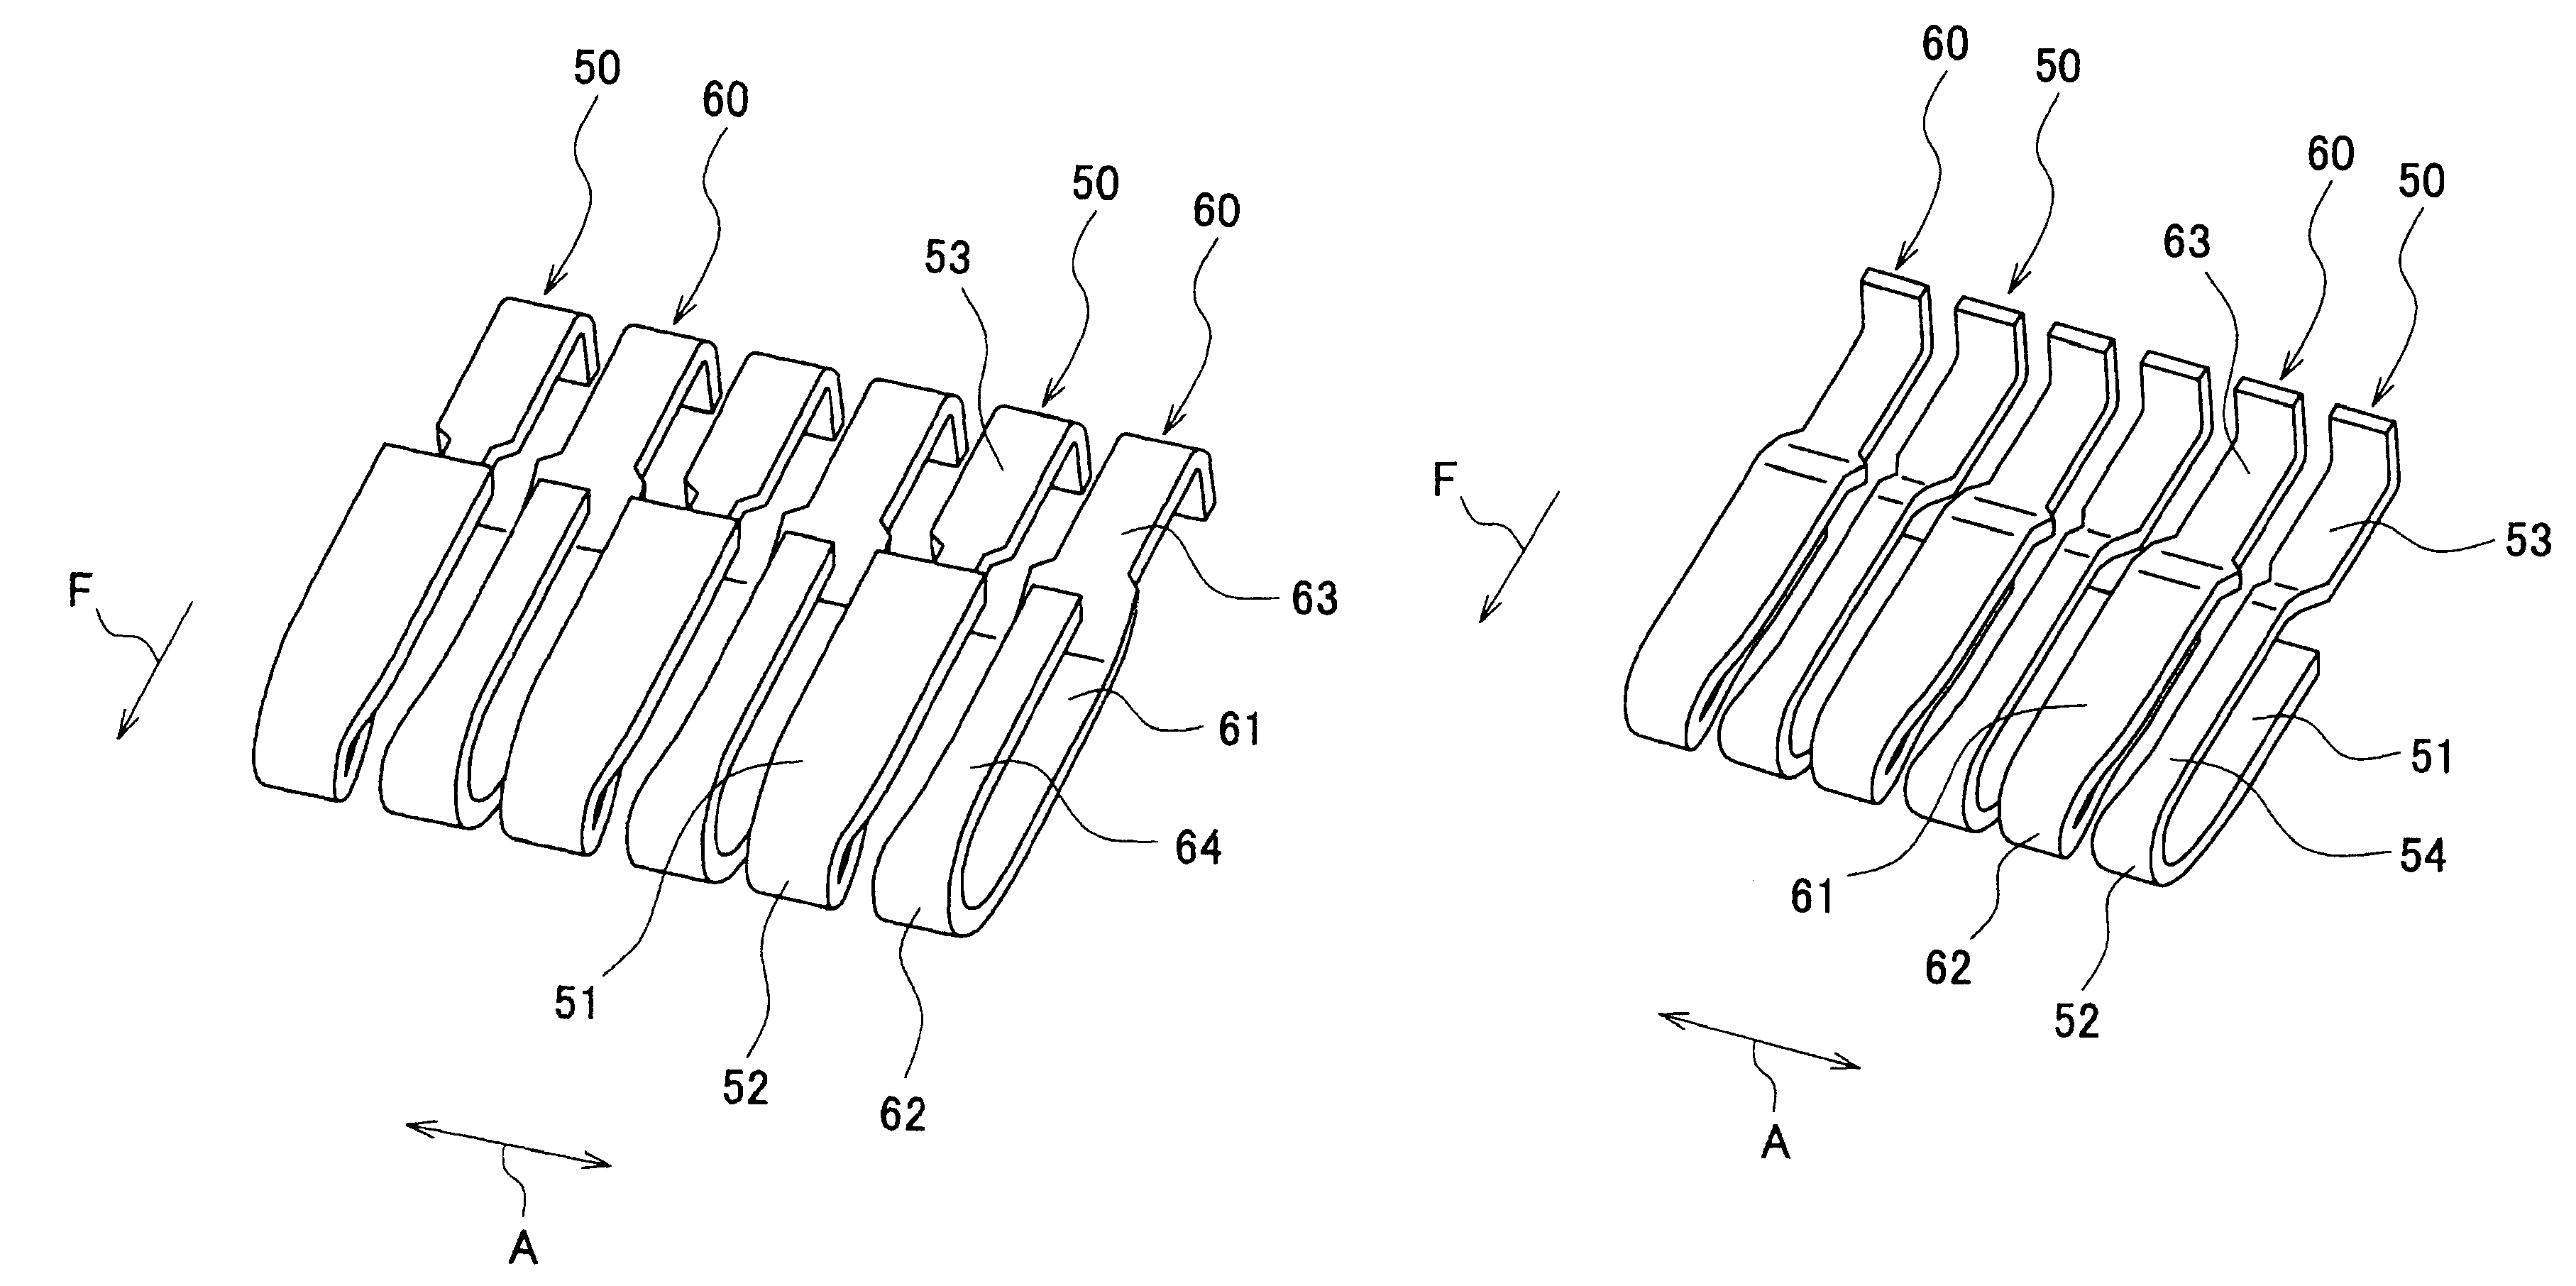 Connector having contacts with a linkage portion having a width smaller than that of the contact portion